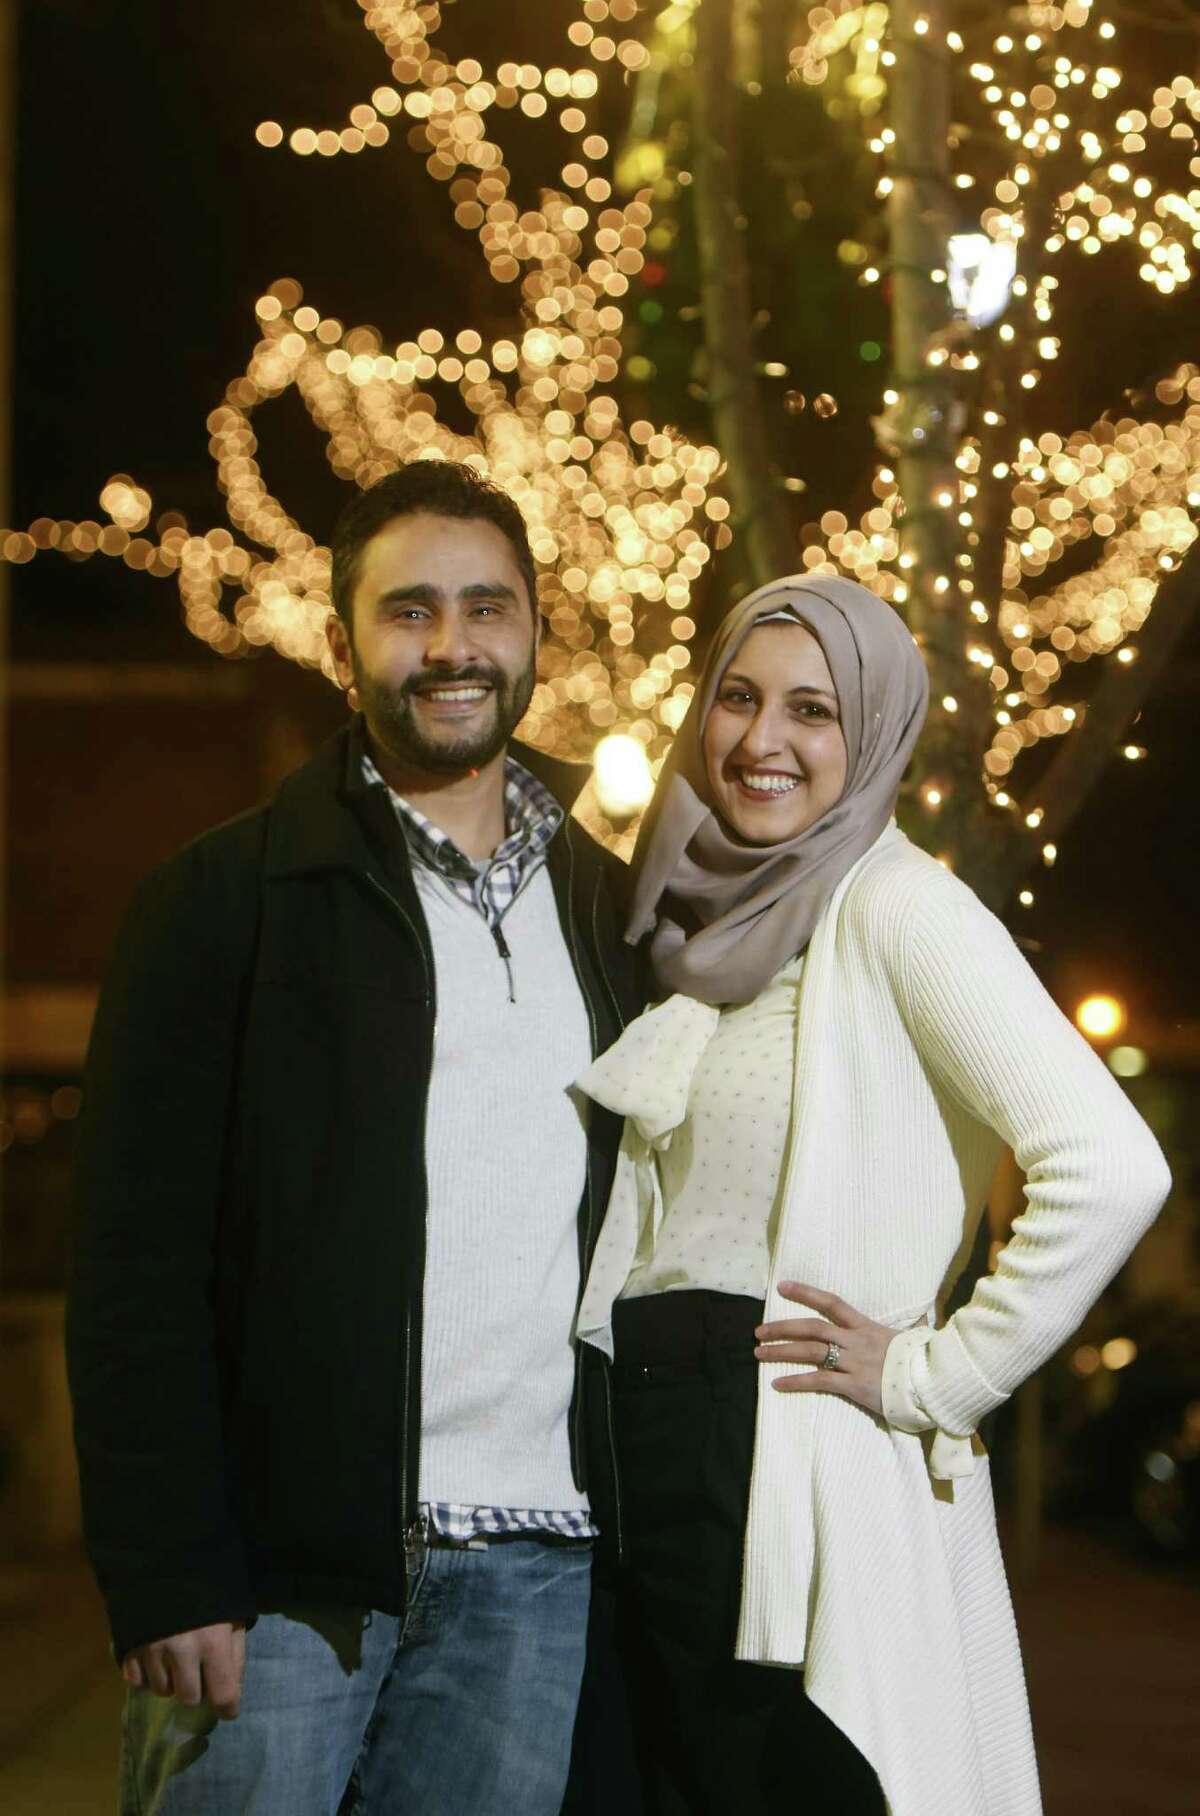 Stamford residents Shaimah Hamdan and her husband Fadi El-Ghussein pose near their home in downtown Stamford, Conn. Thursday, Jan. 19, 2017. The young couple has been living in Stamford for two years, moving to the area from New Hampshire for Fadi's job.